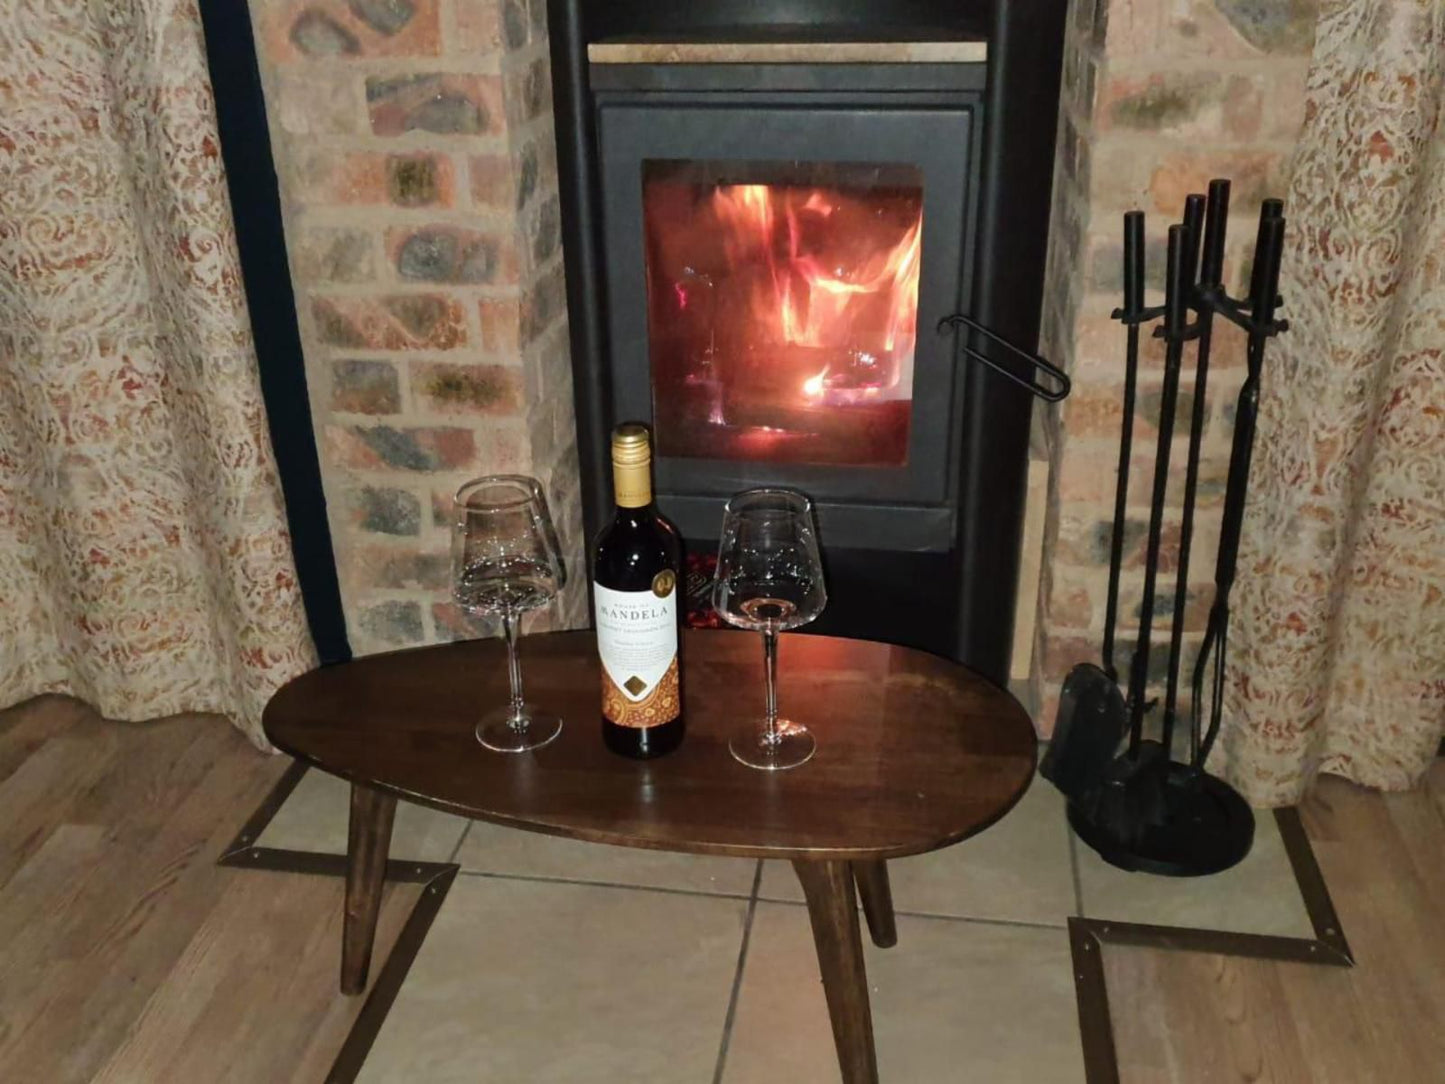 Cute And Quirky Clarens Clarens Golf And Trout Estate Clarens Free State South Africa Fireplace, Wine, Drink